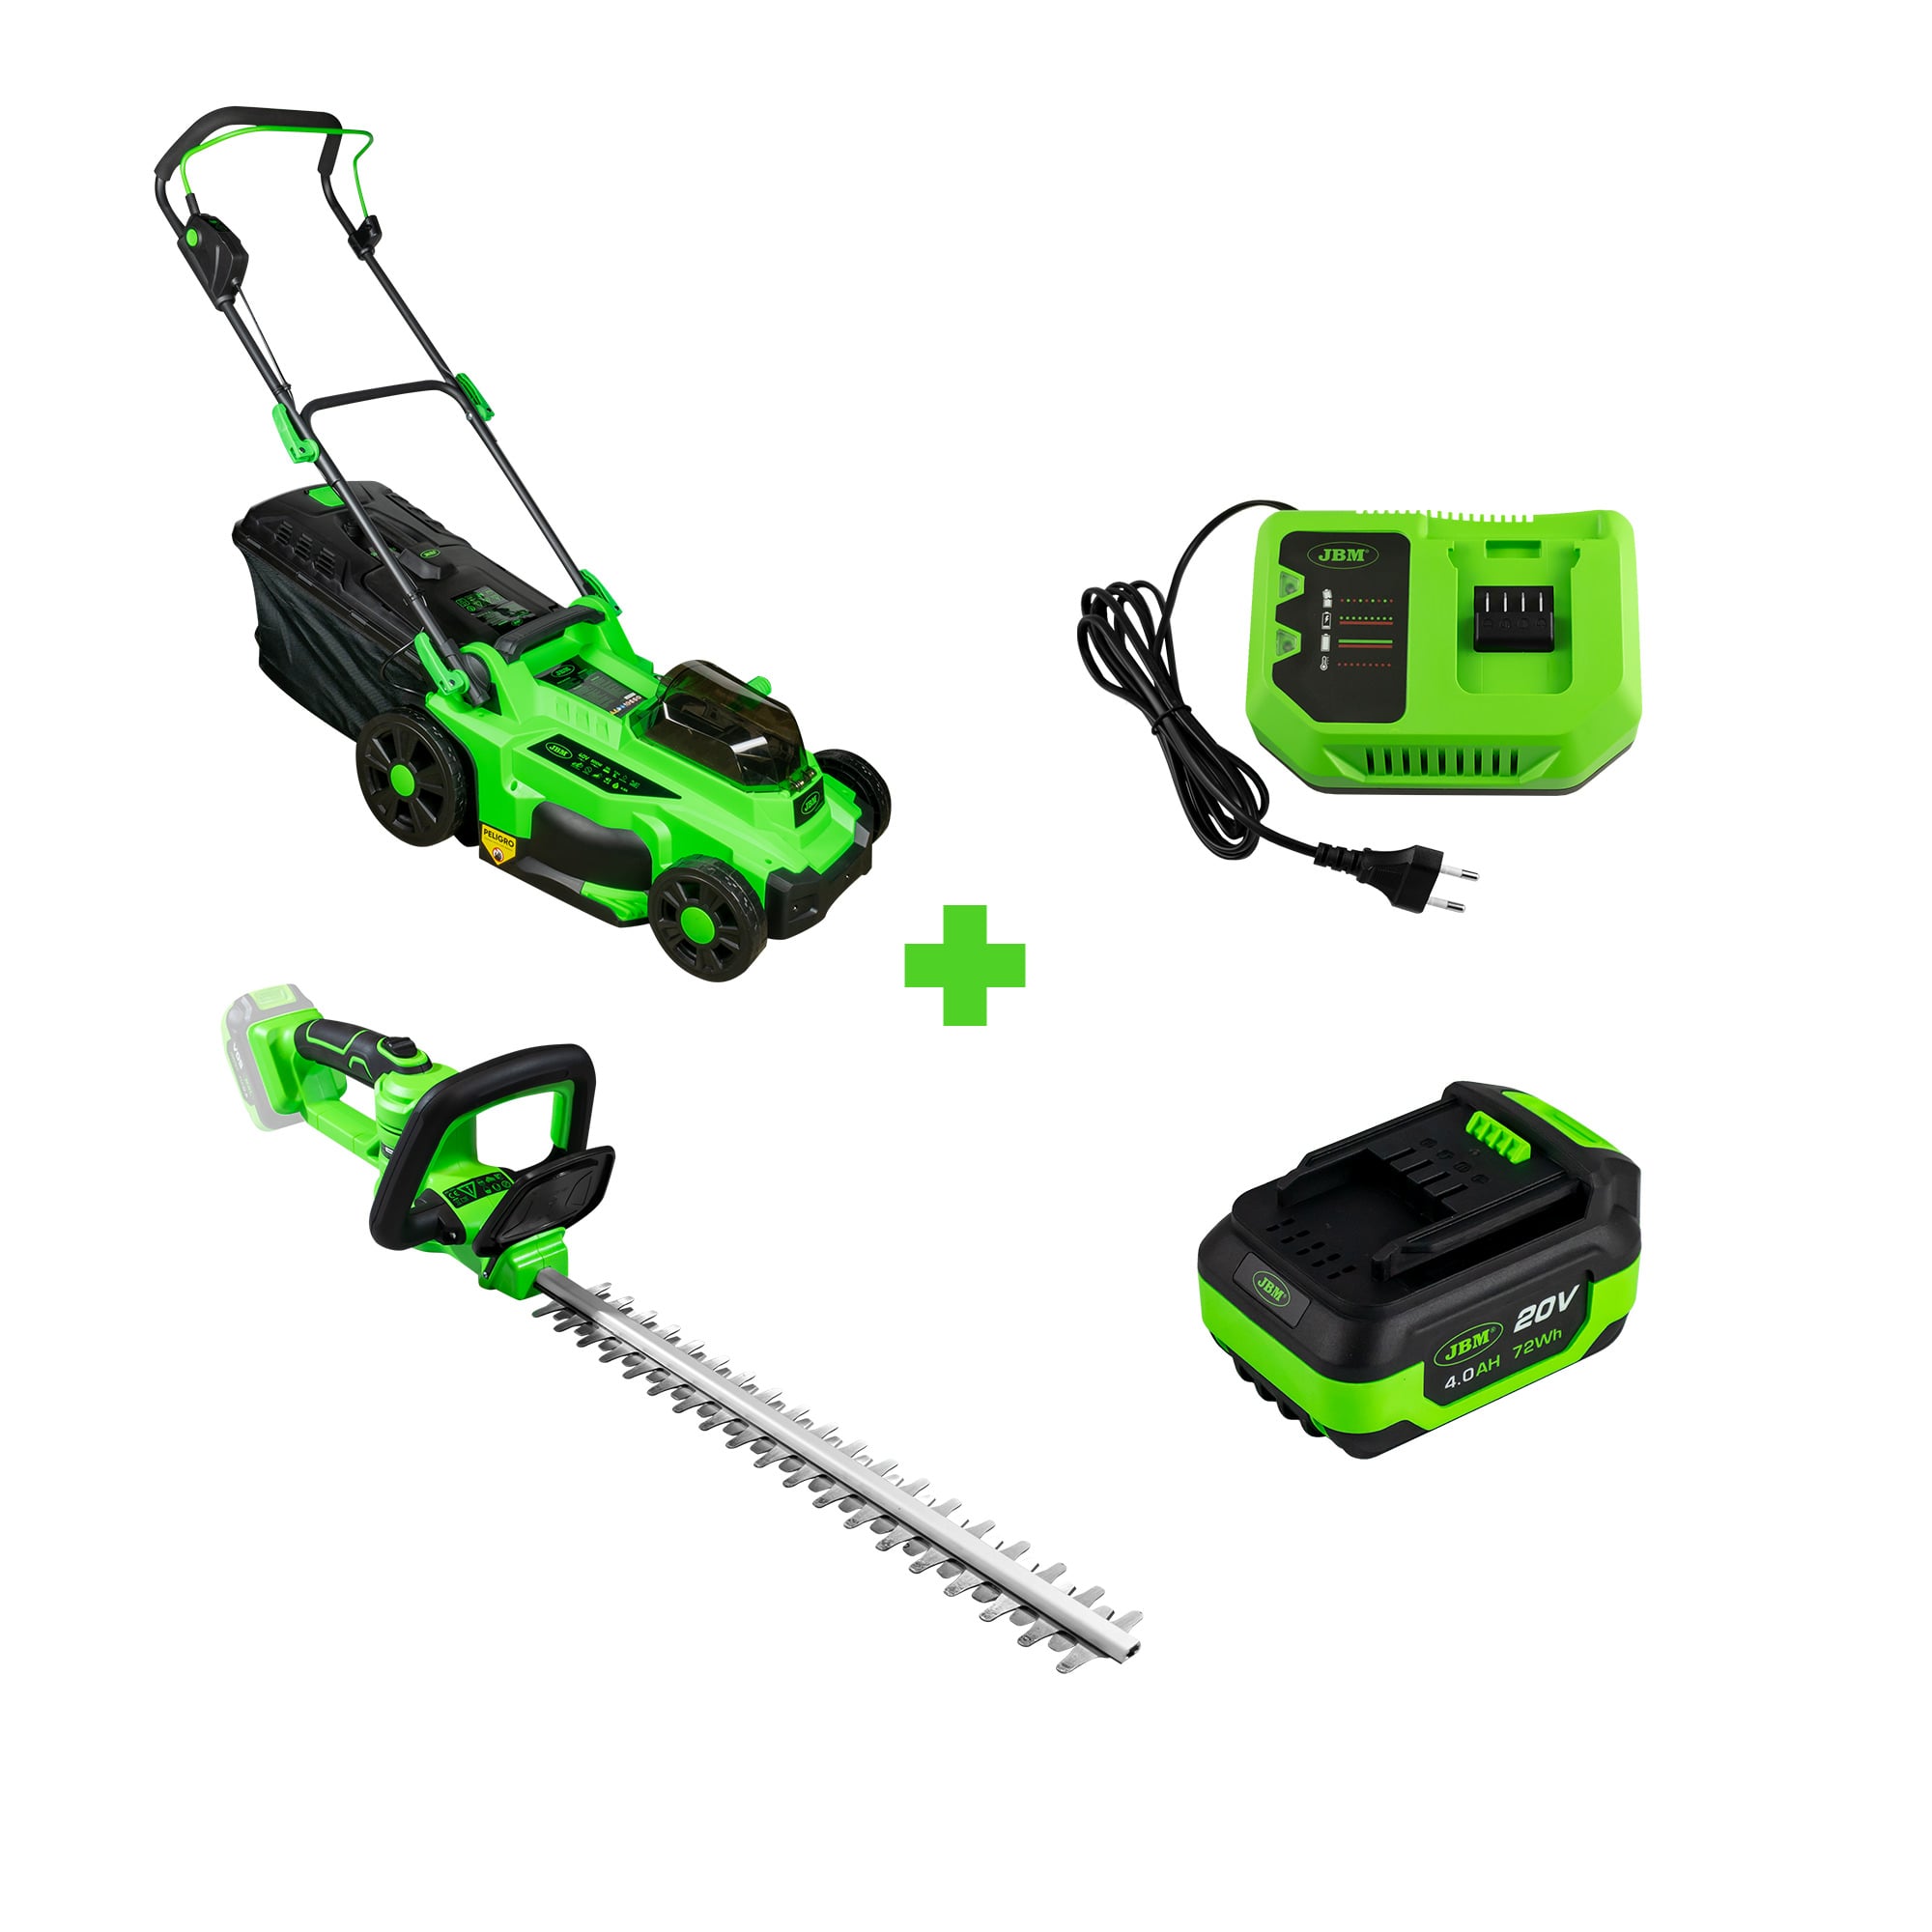 60031 BATTERY HEDGE TRIMMER + 60045 CORDLESS LAWN MOWER + 60016 + 60013